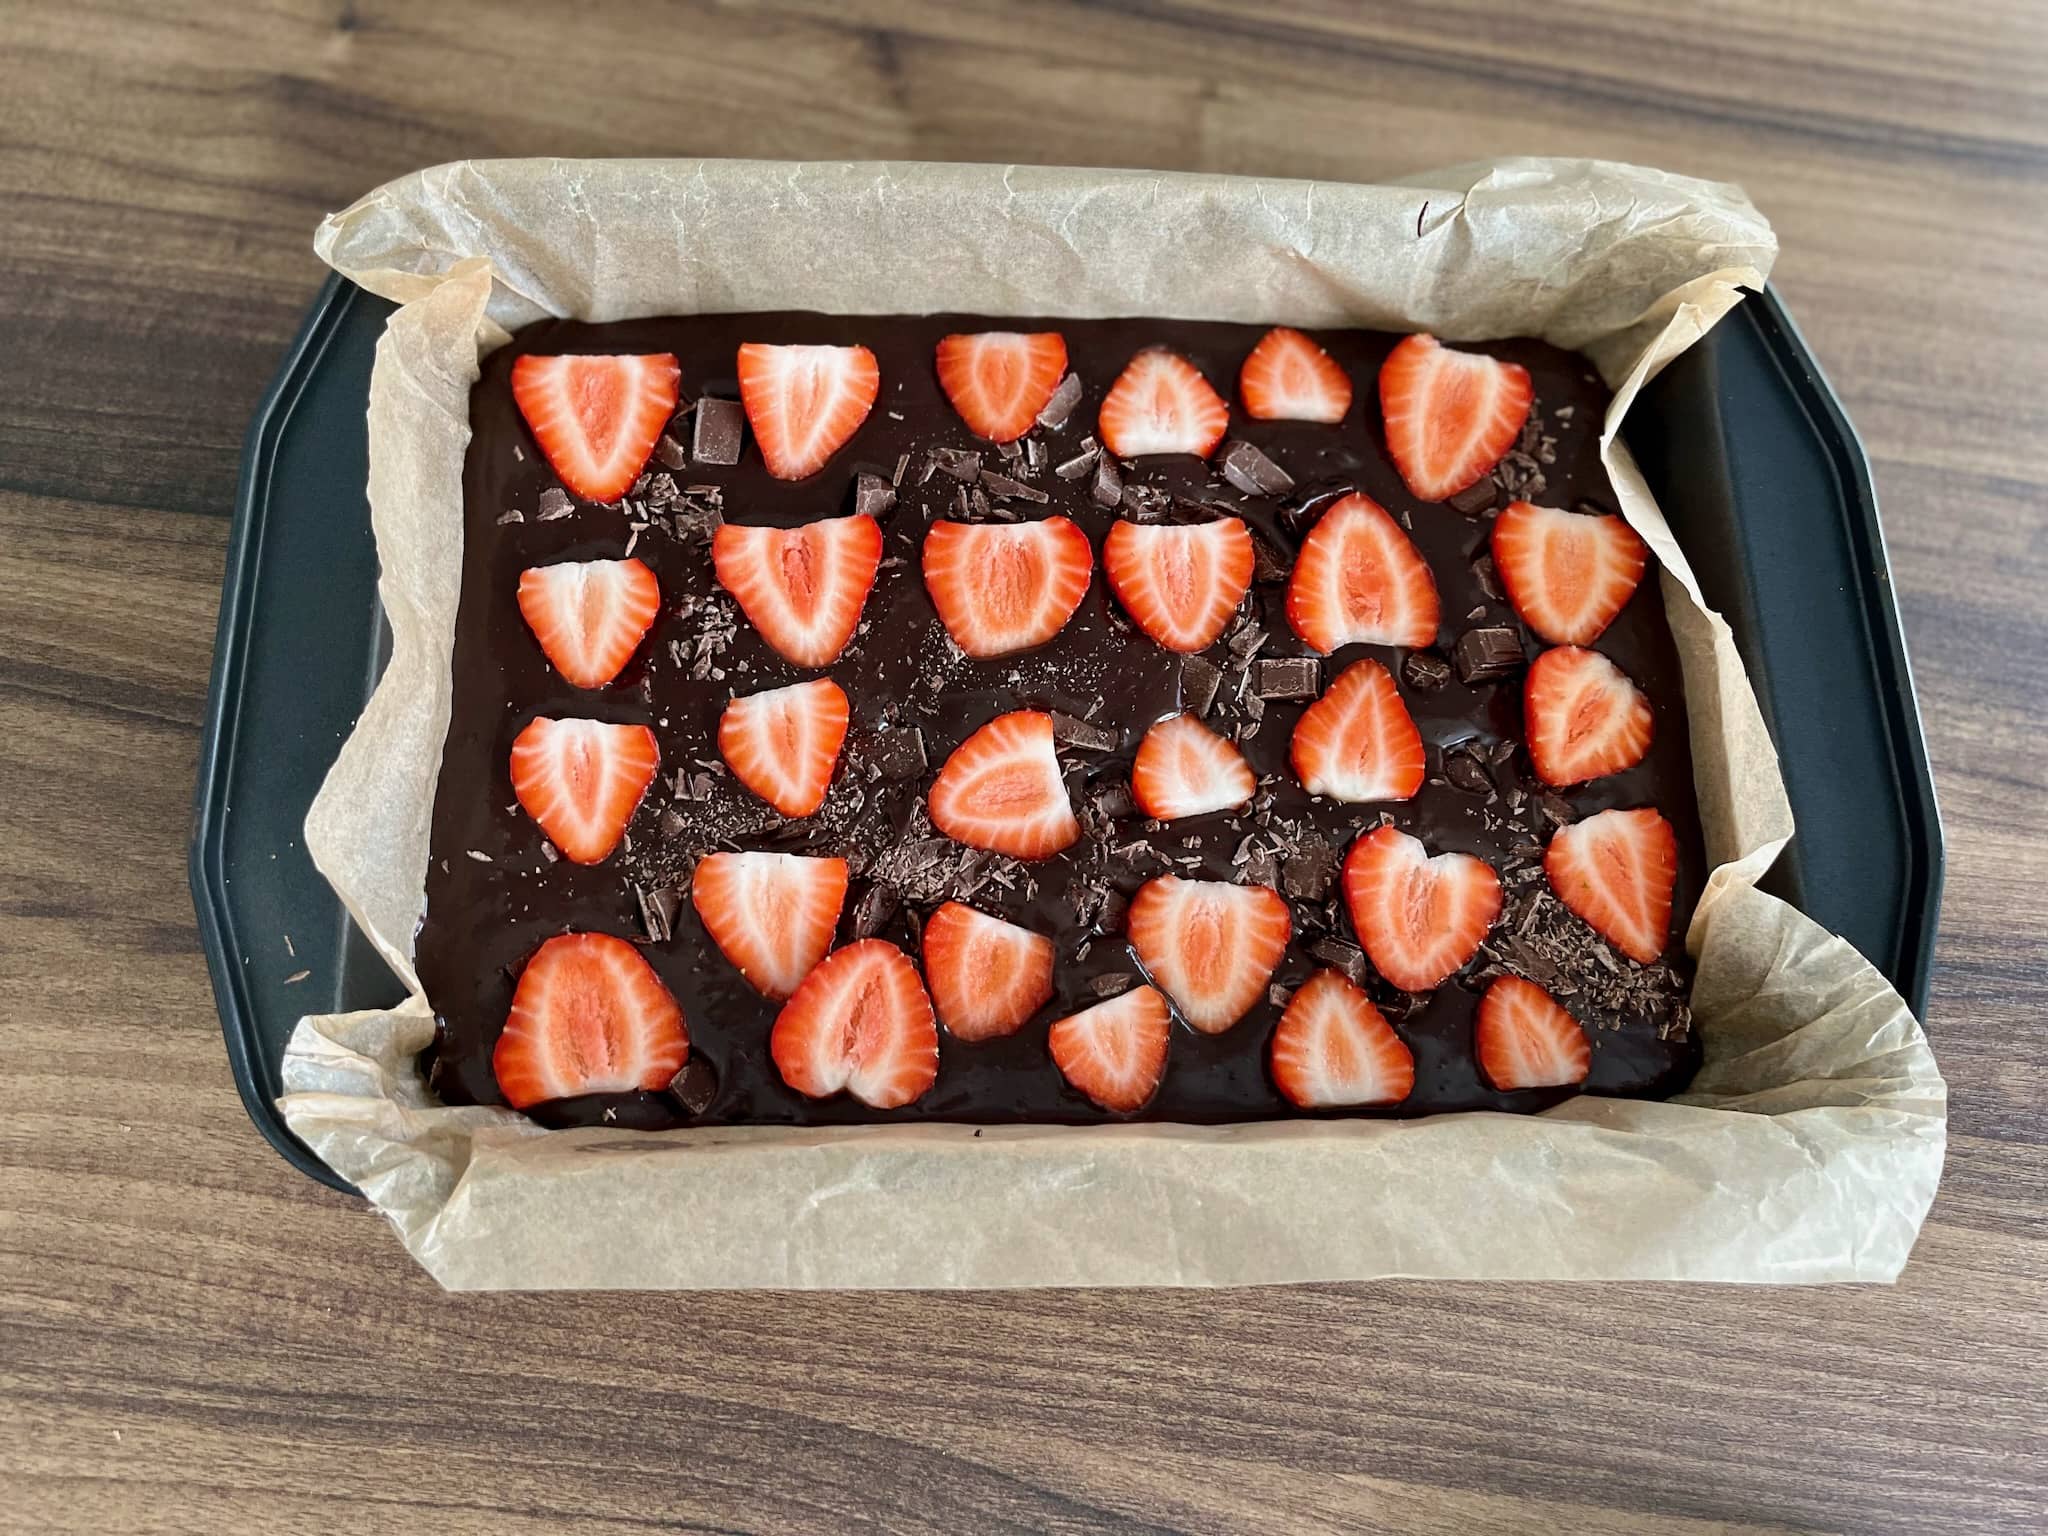 Brownie mix in a baking tray with chopped chocolate and strawberries, ready to bake